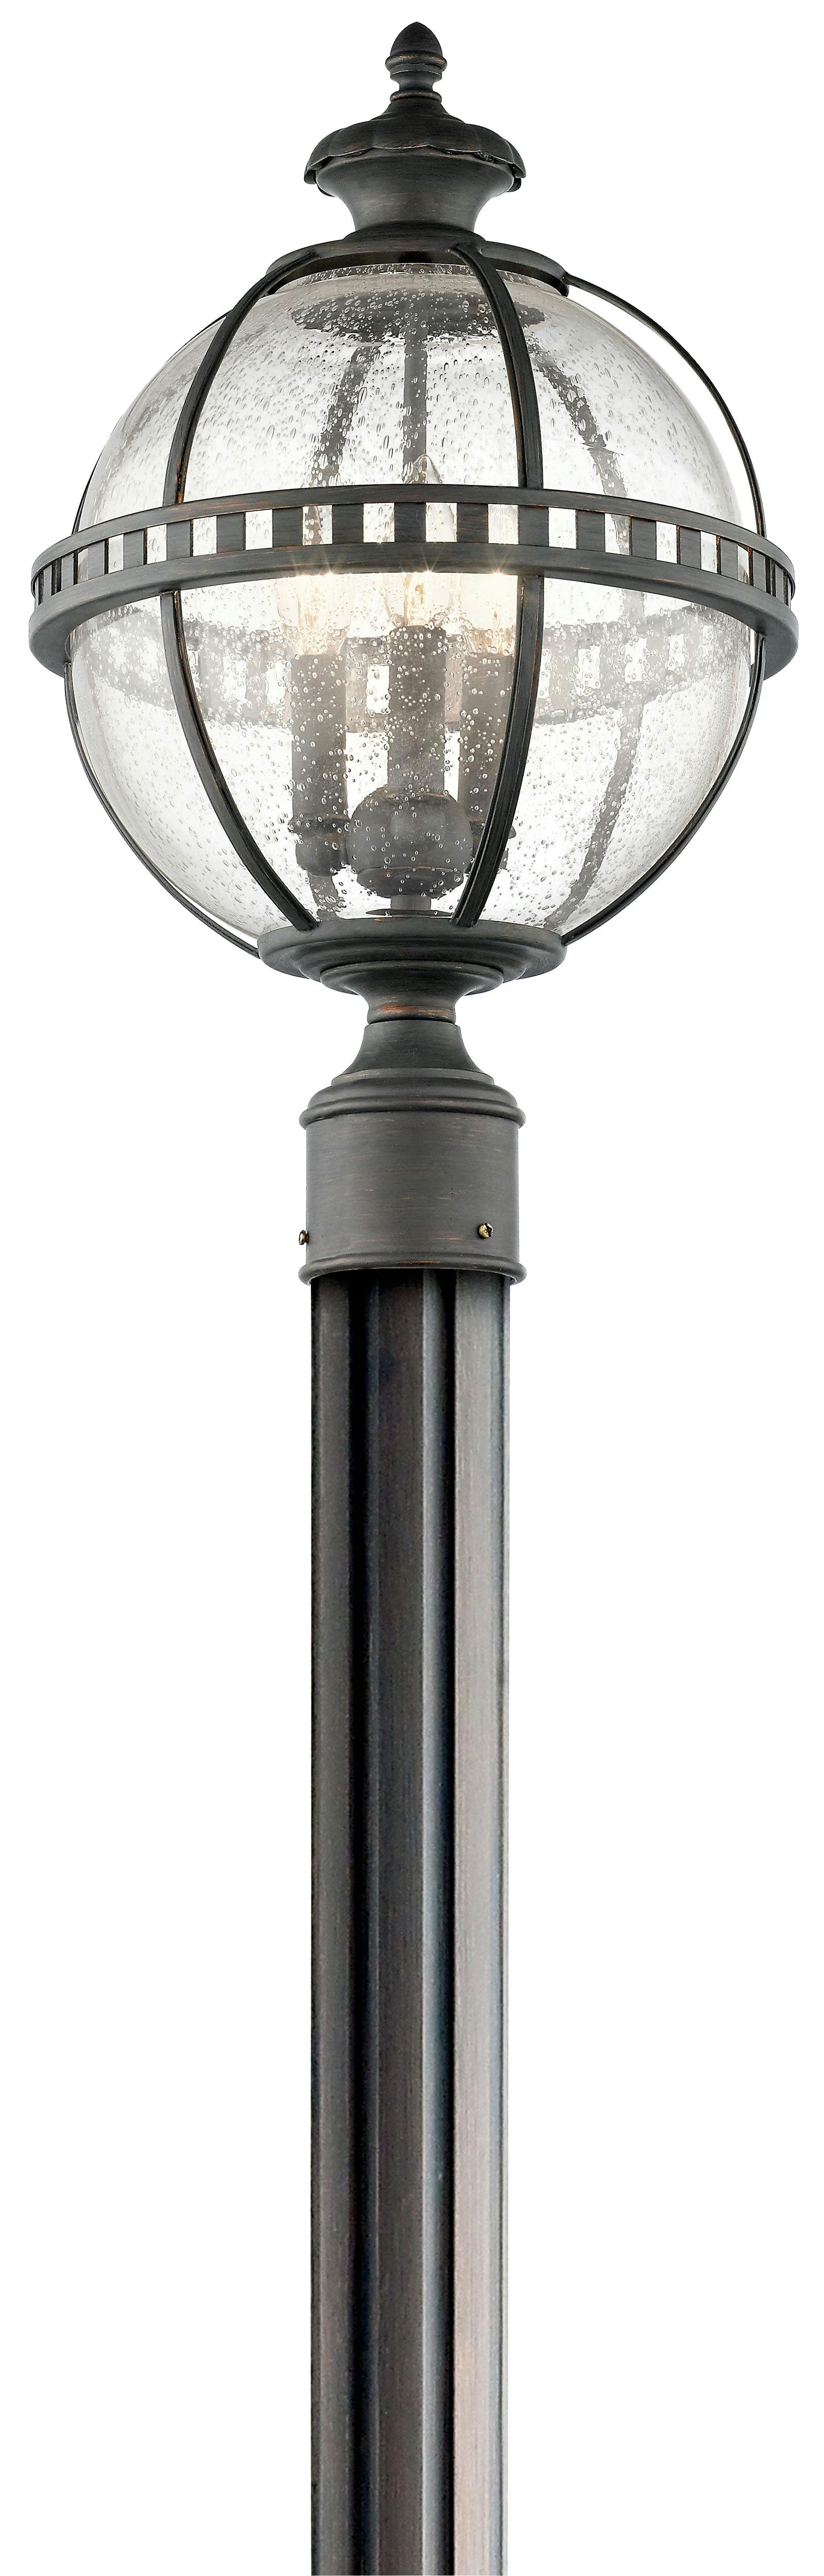 Halleron™ 3 Light Post Light Londonderry™ on a white background